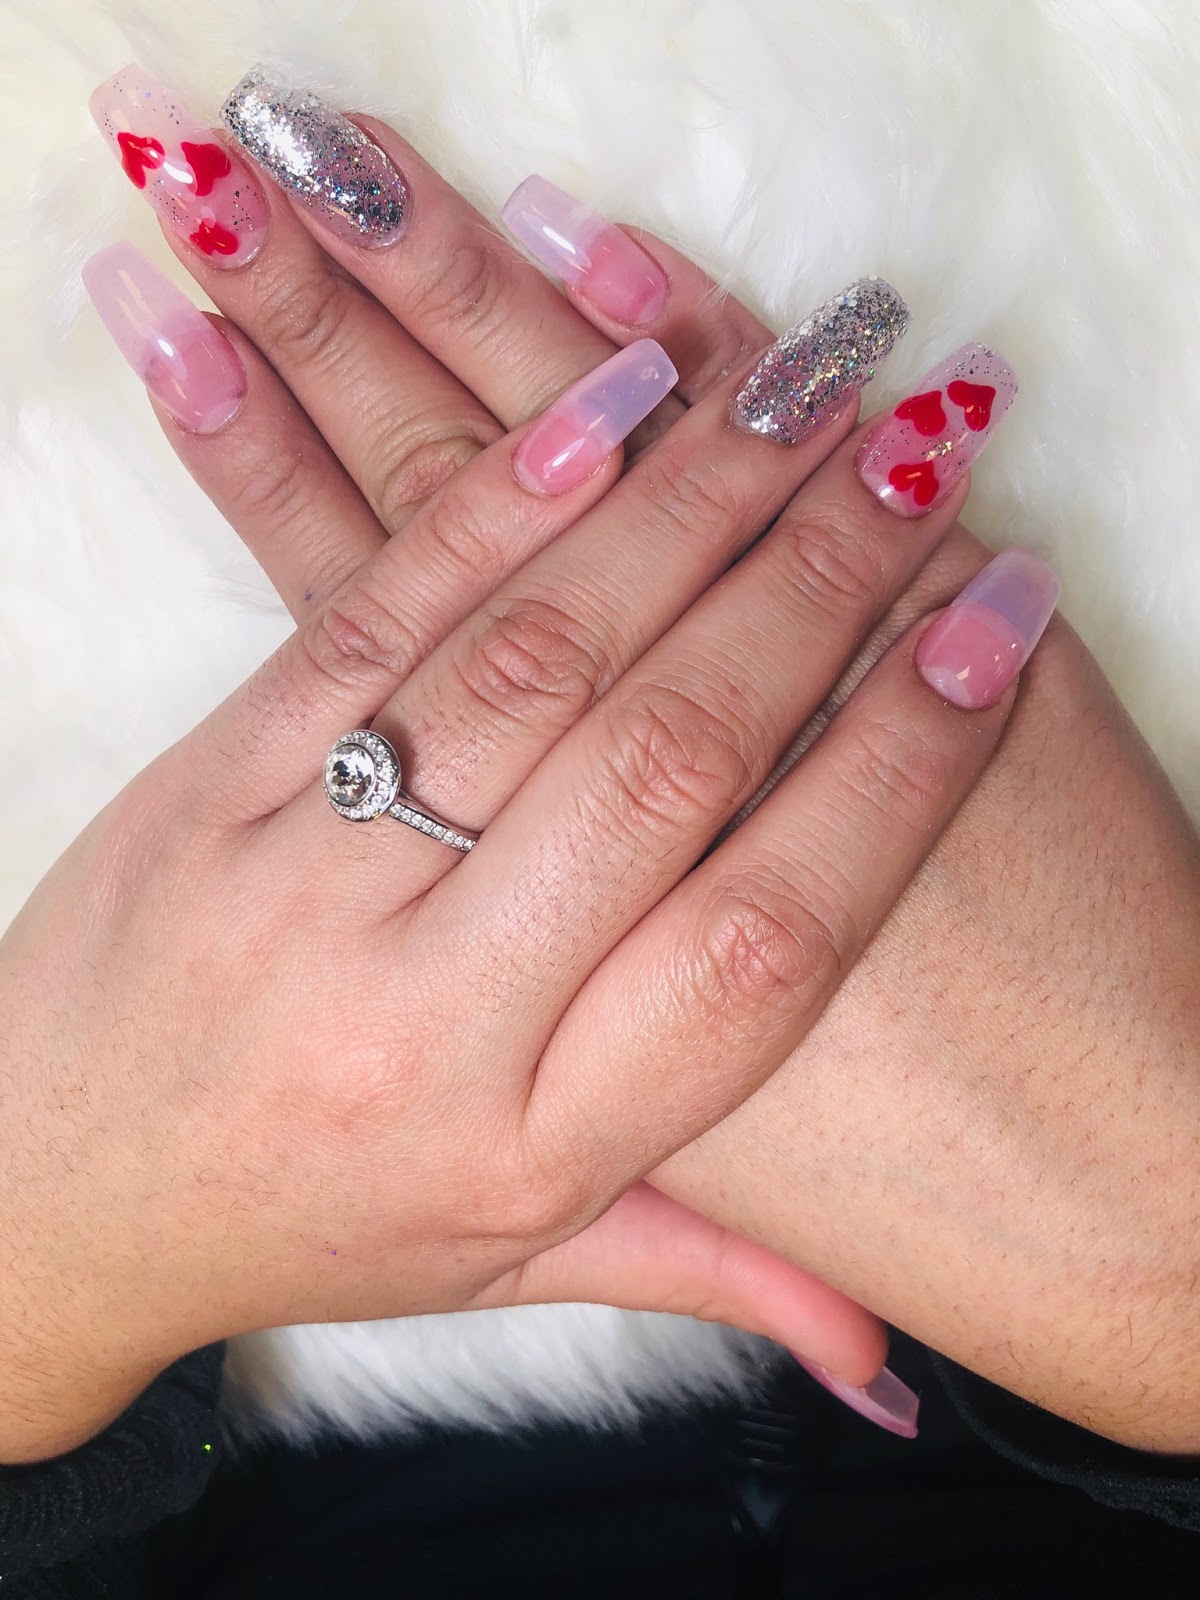 Pink and White Nails - Nail salon in Lakewood, CO 80226